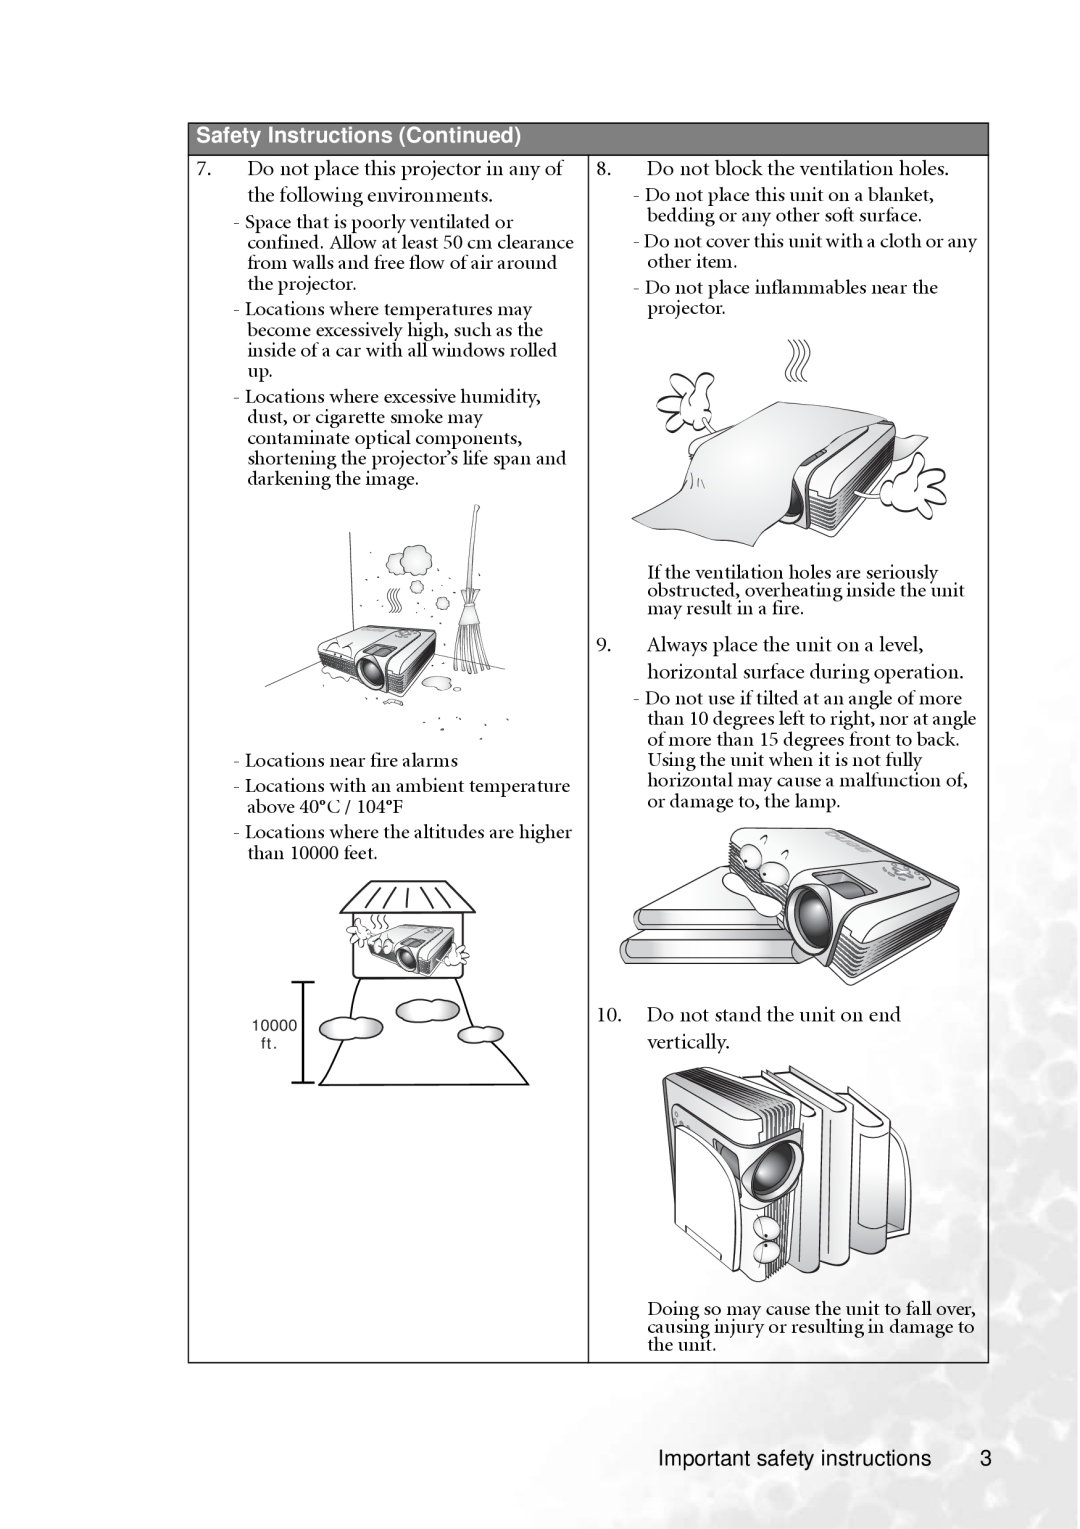 BenQ PB8260 user manual Safety Instructions Continued, 10000 ft 